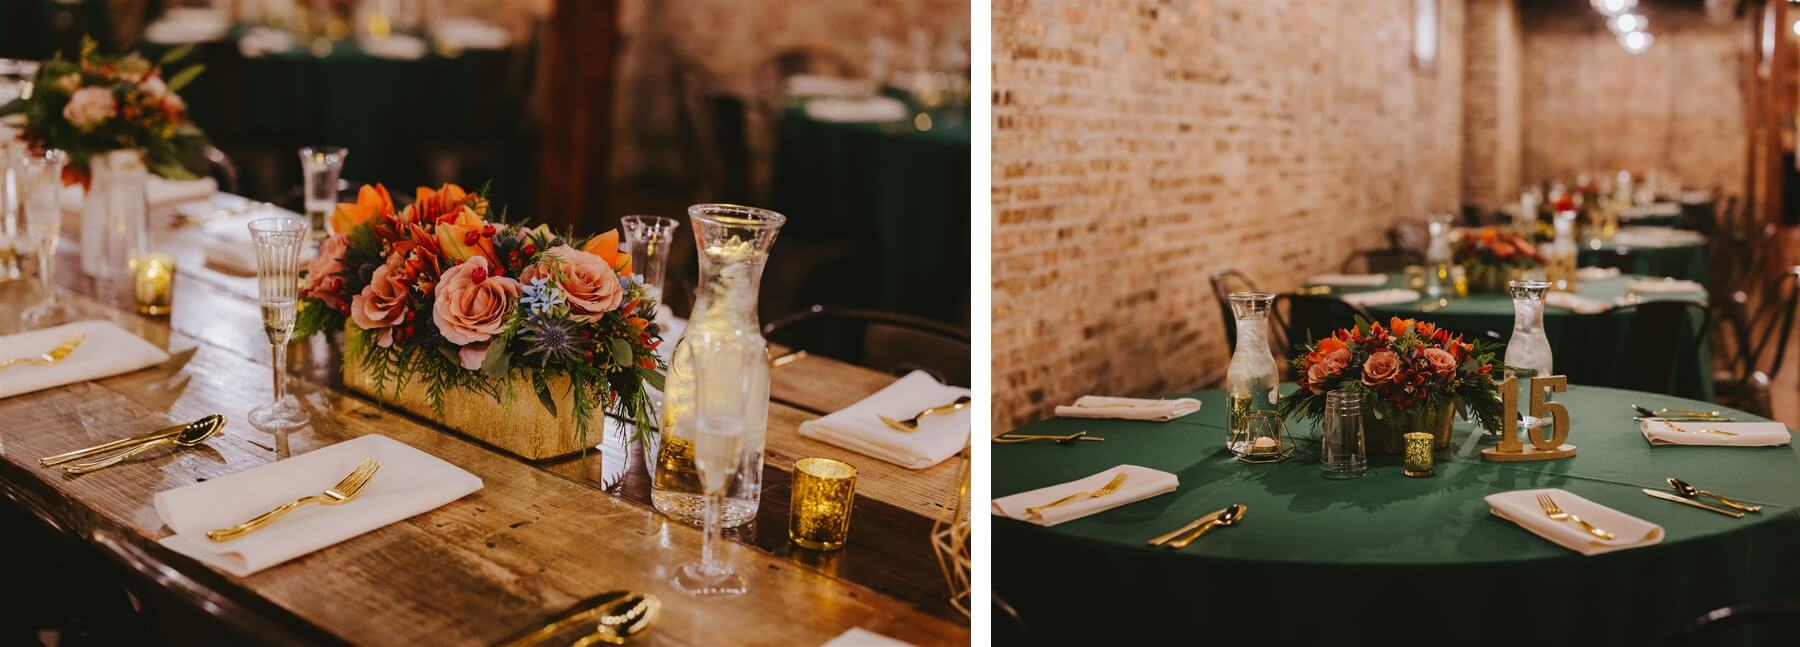 Flower arrangement with red, orange, and pink flowers | moss green table cloth with gold accents at The Haight